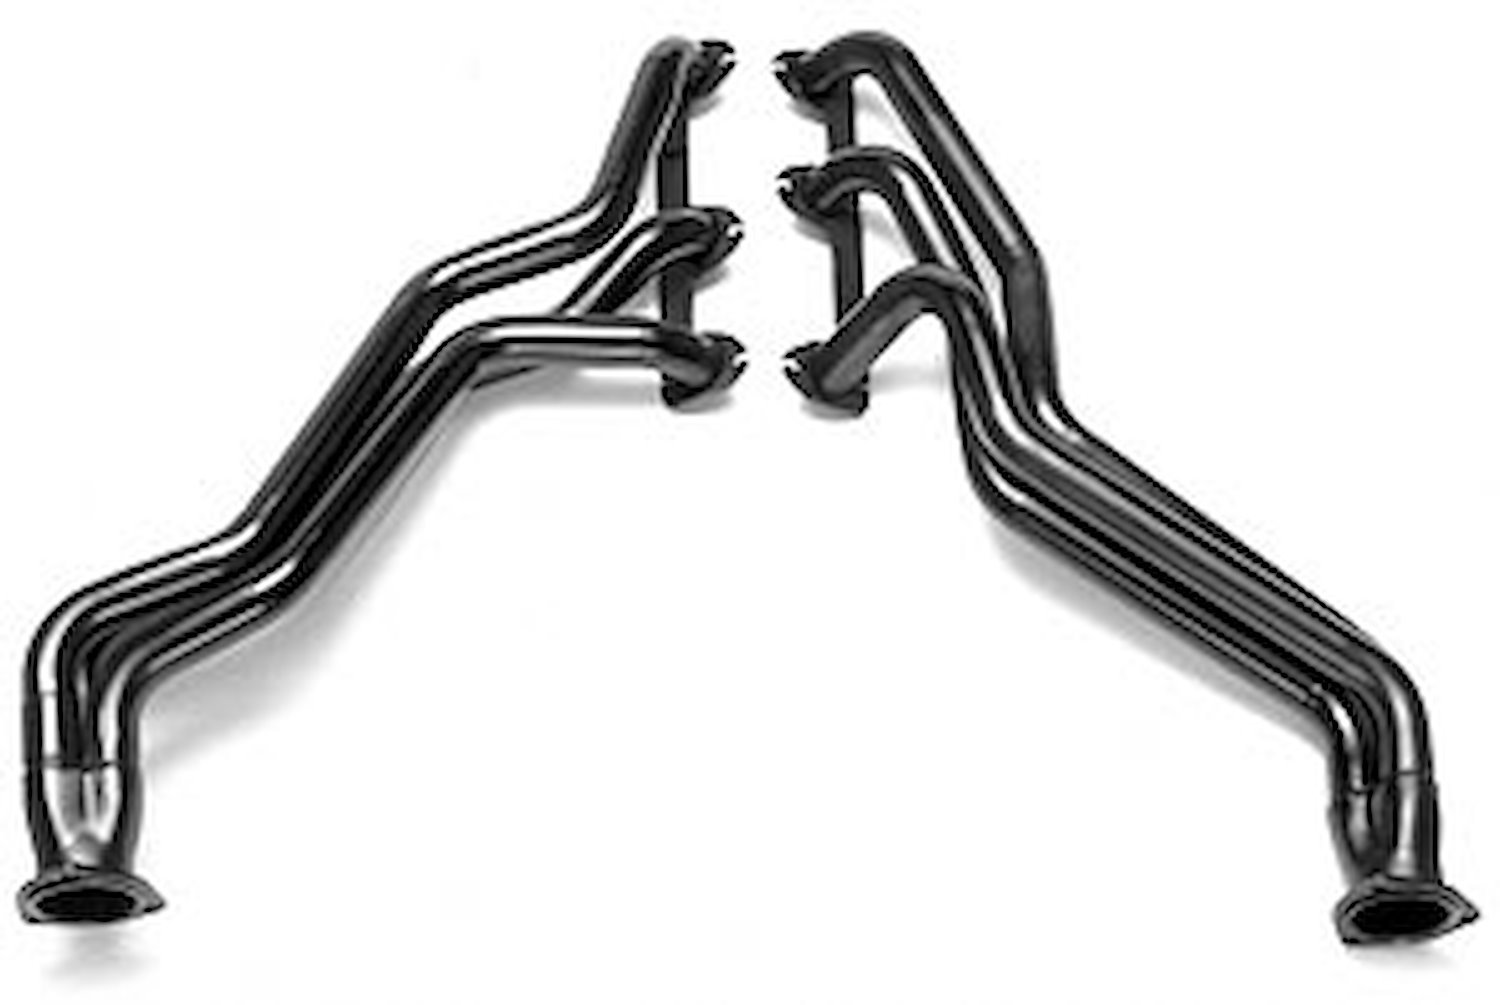 Standard Duty Uncoated Full Length Headers for 1982-88 S10/S15/Blazer/Jimmy/Sonoma 2.8L